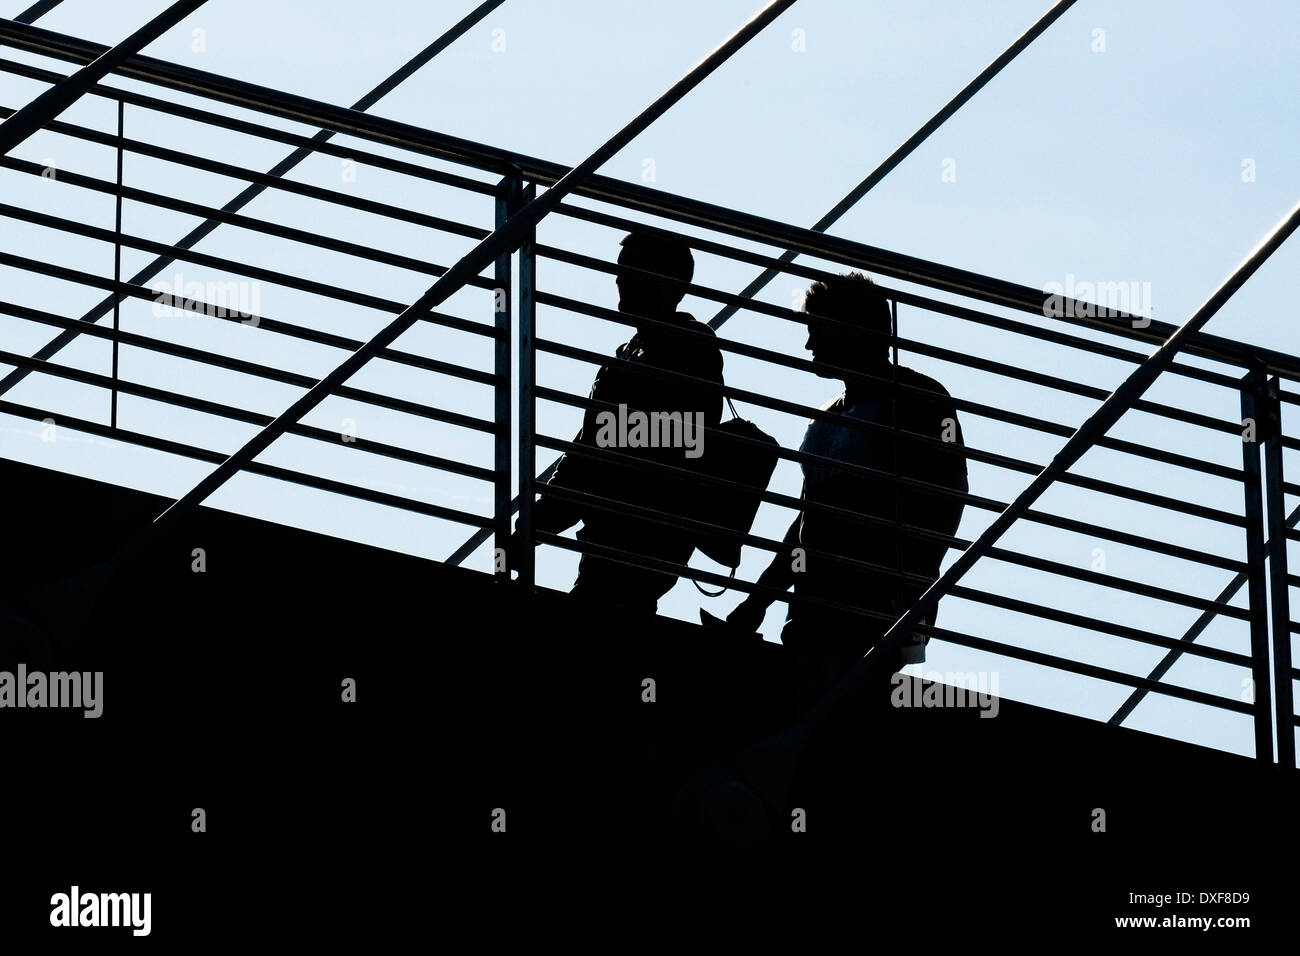 The silhouette of two people walking across a bridge. Stock Photo